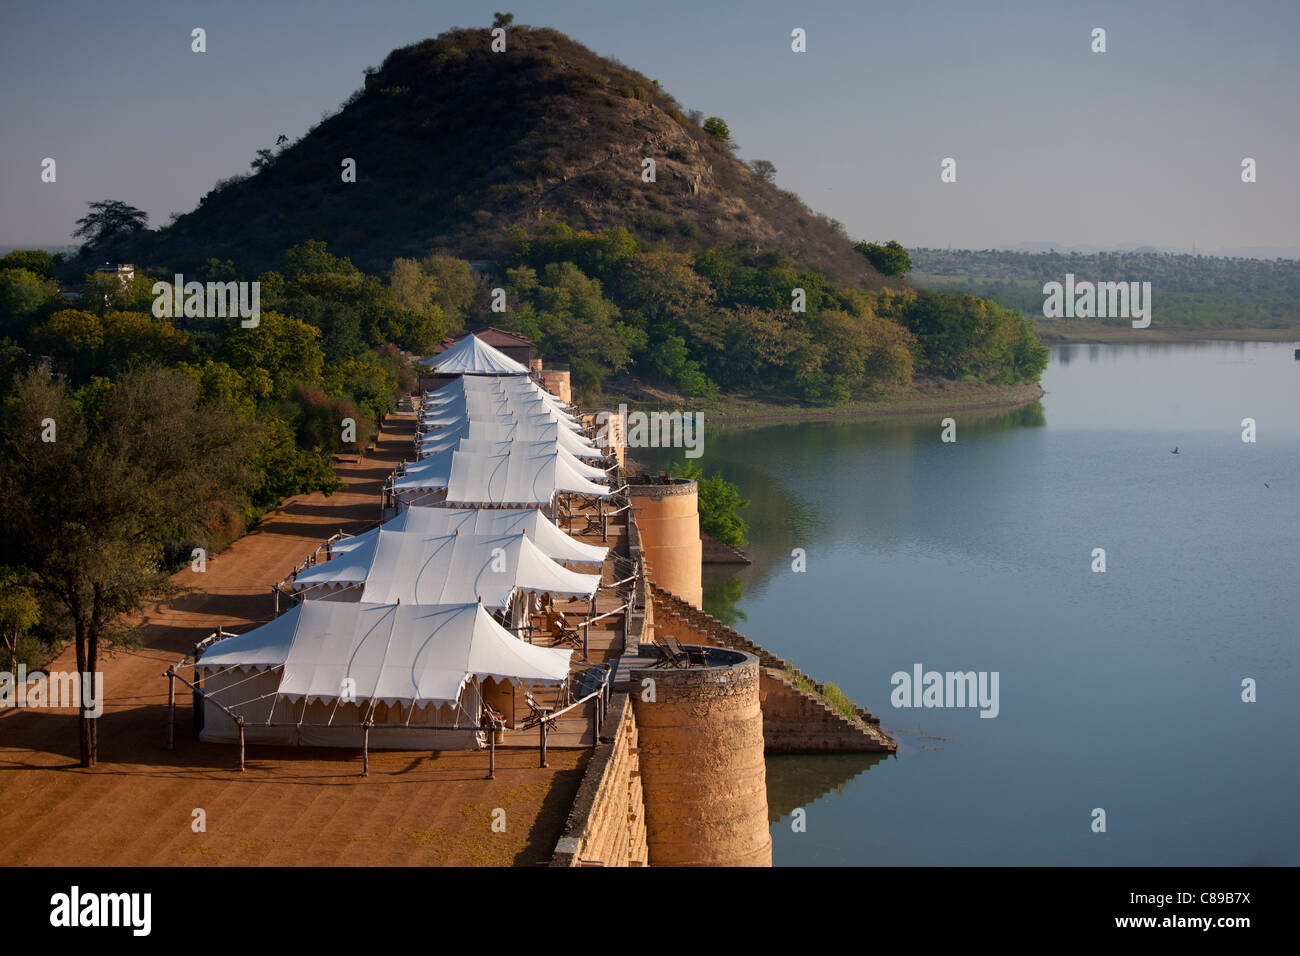 Chhatra Sagar reservoir and luxury tented camp oasis in the desert at Nimaj, Rajasthan, Northern India Stock Photo